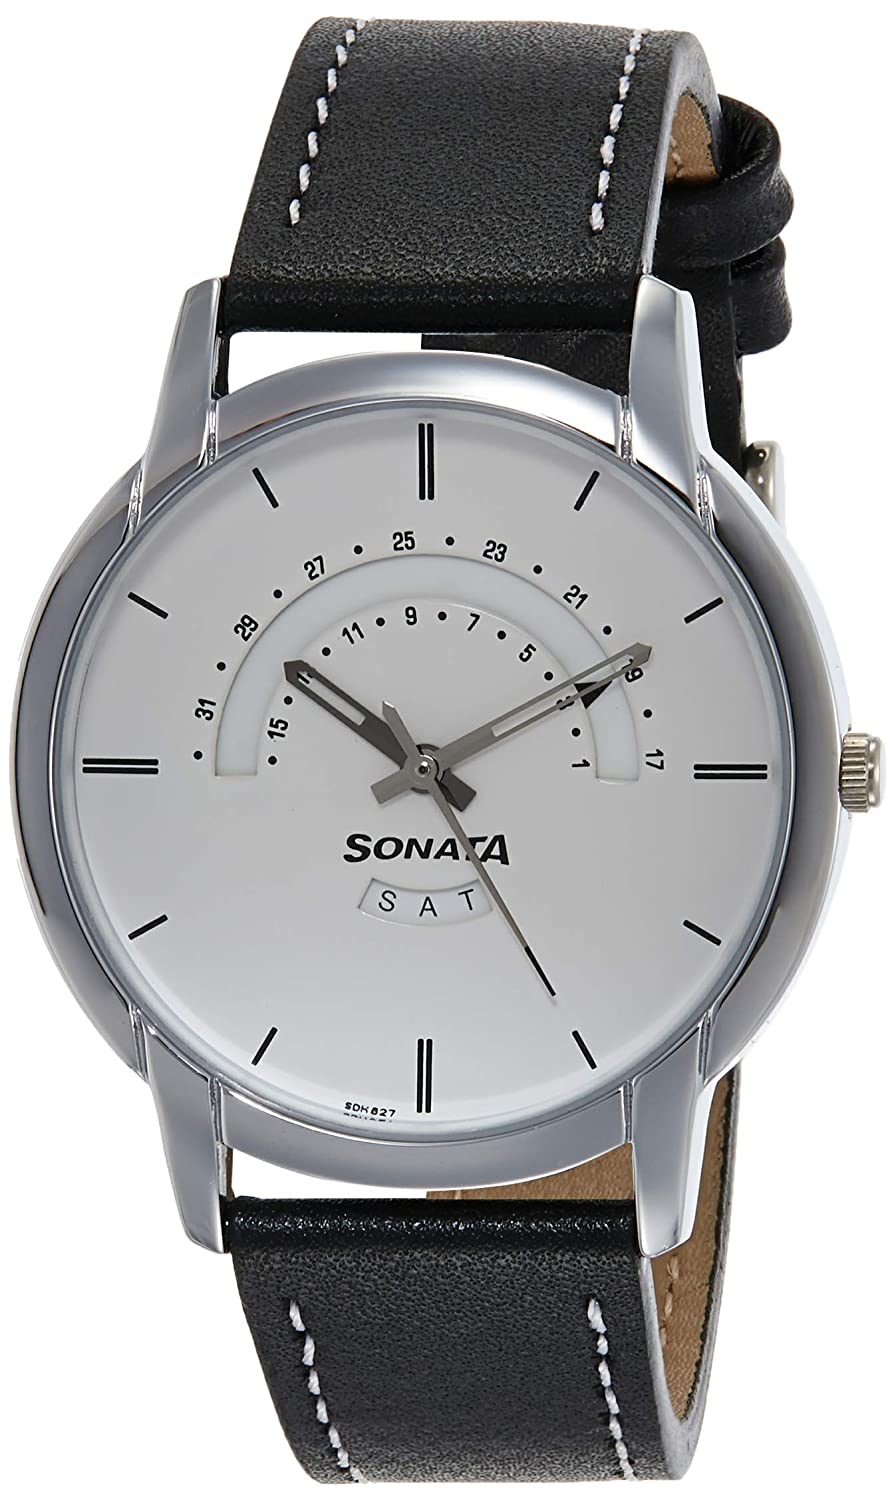 Sonata Analog White Dial Men's Watch 77031SL02 | Leather Band | Water-Resistant | Quartz Movement | Classic Style | Fashionable | Durable | Affordable | Halabh.com